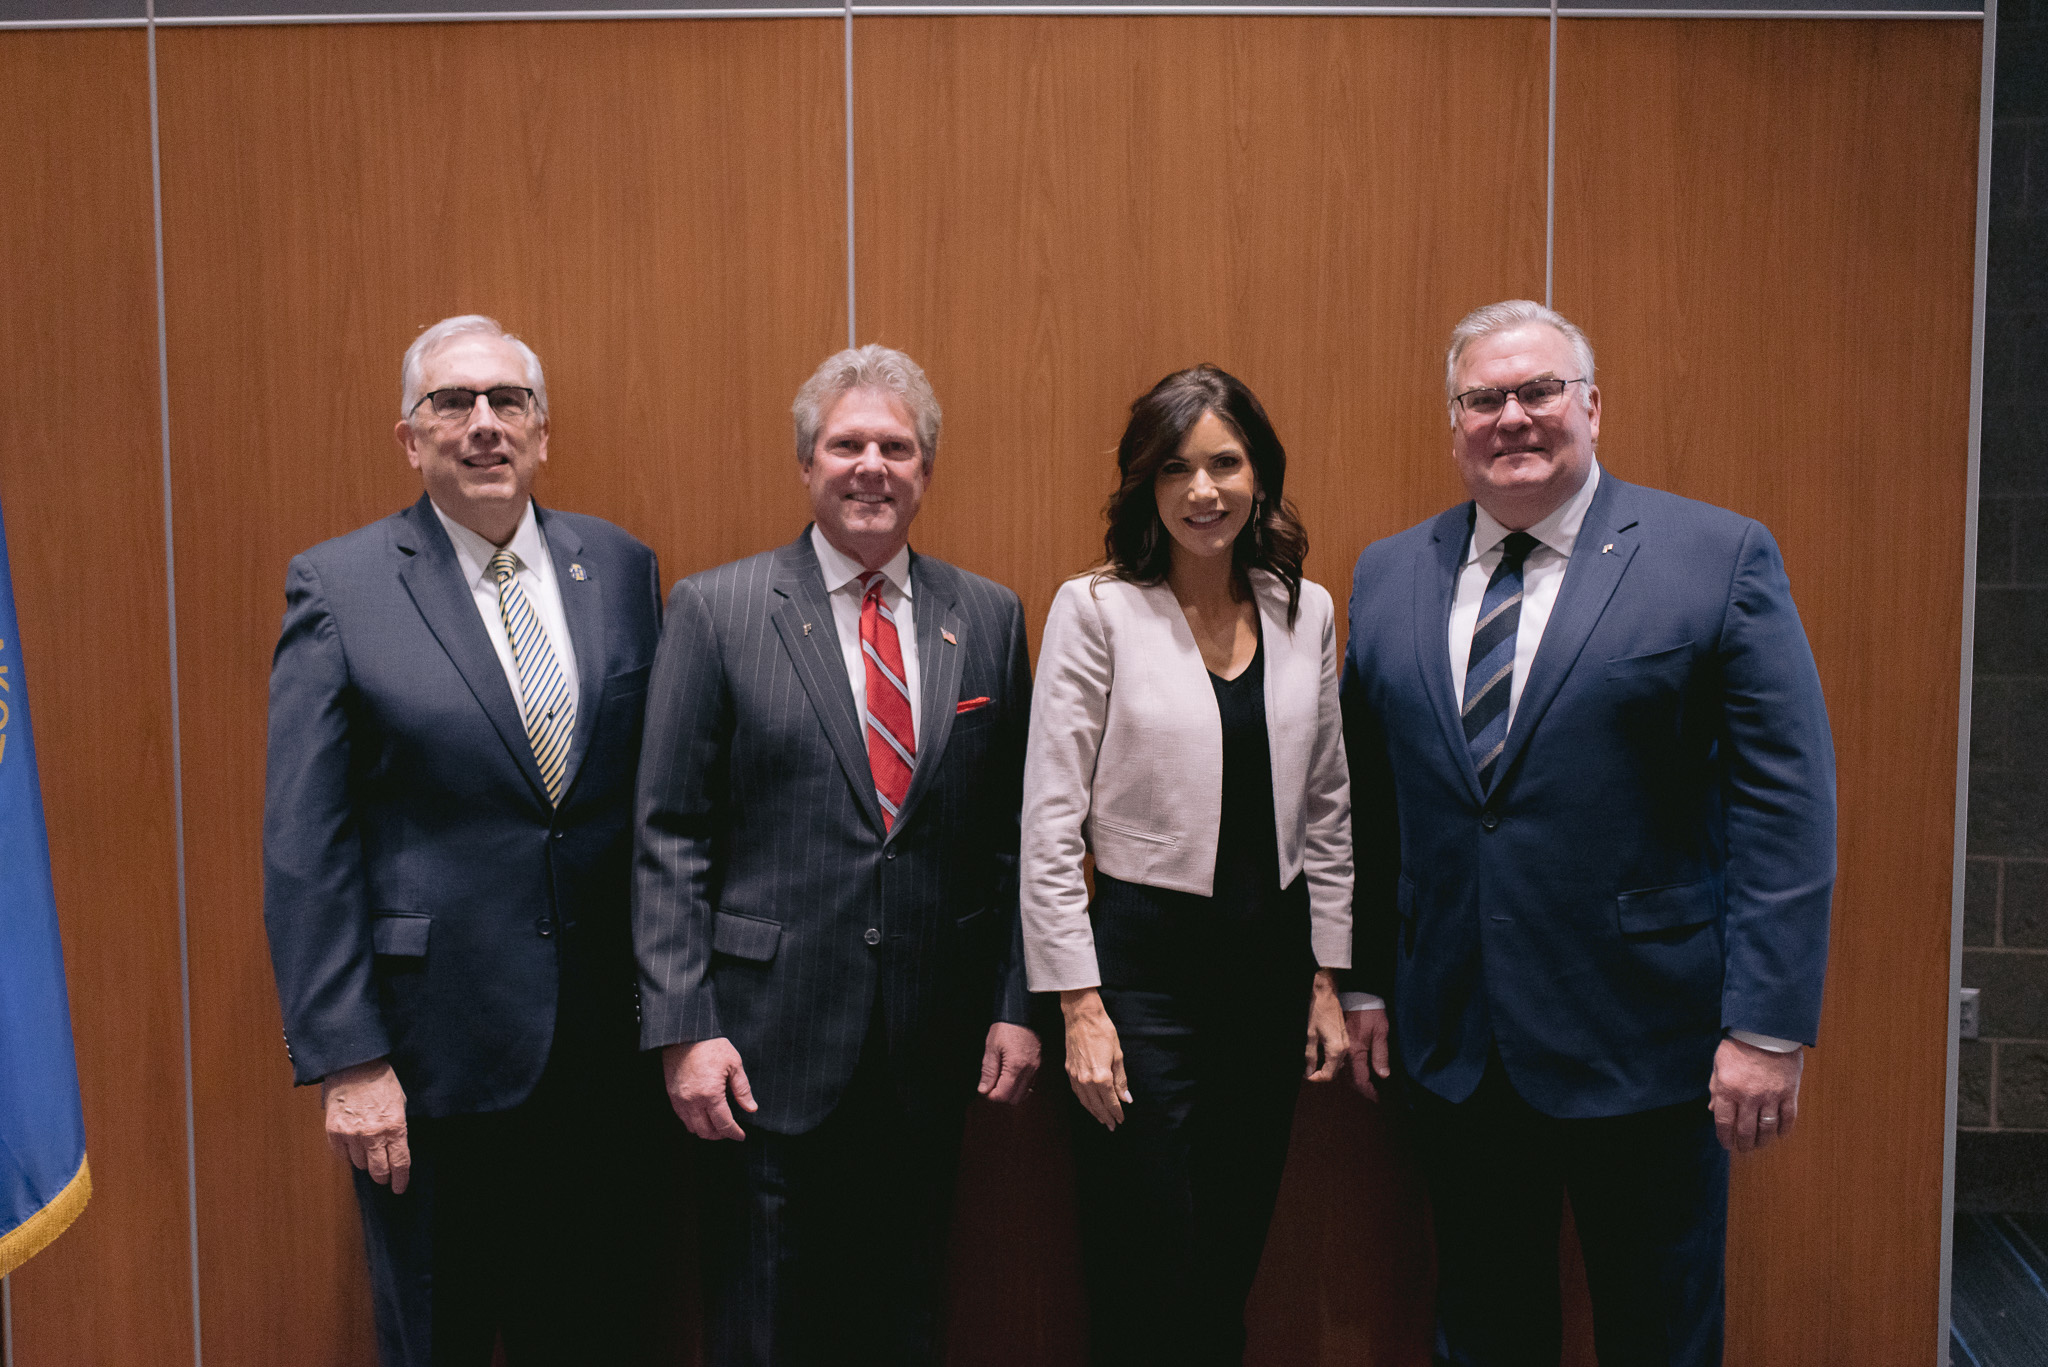 Pictured from left are: SDSU President Dr. Barry Dunn, PREMIER Bankcard CEO Miles Beacom, South Dakota Governor Kristi Noem and First PREMIER Bank CEO Dana Dykhouse